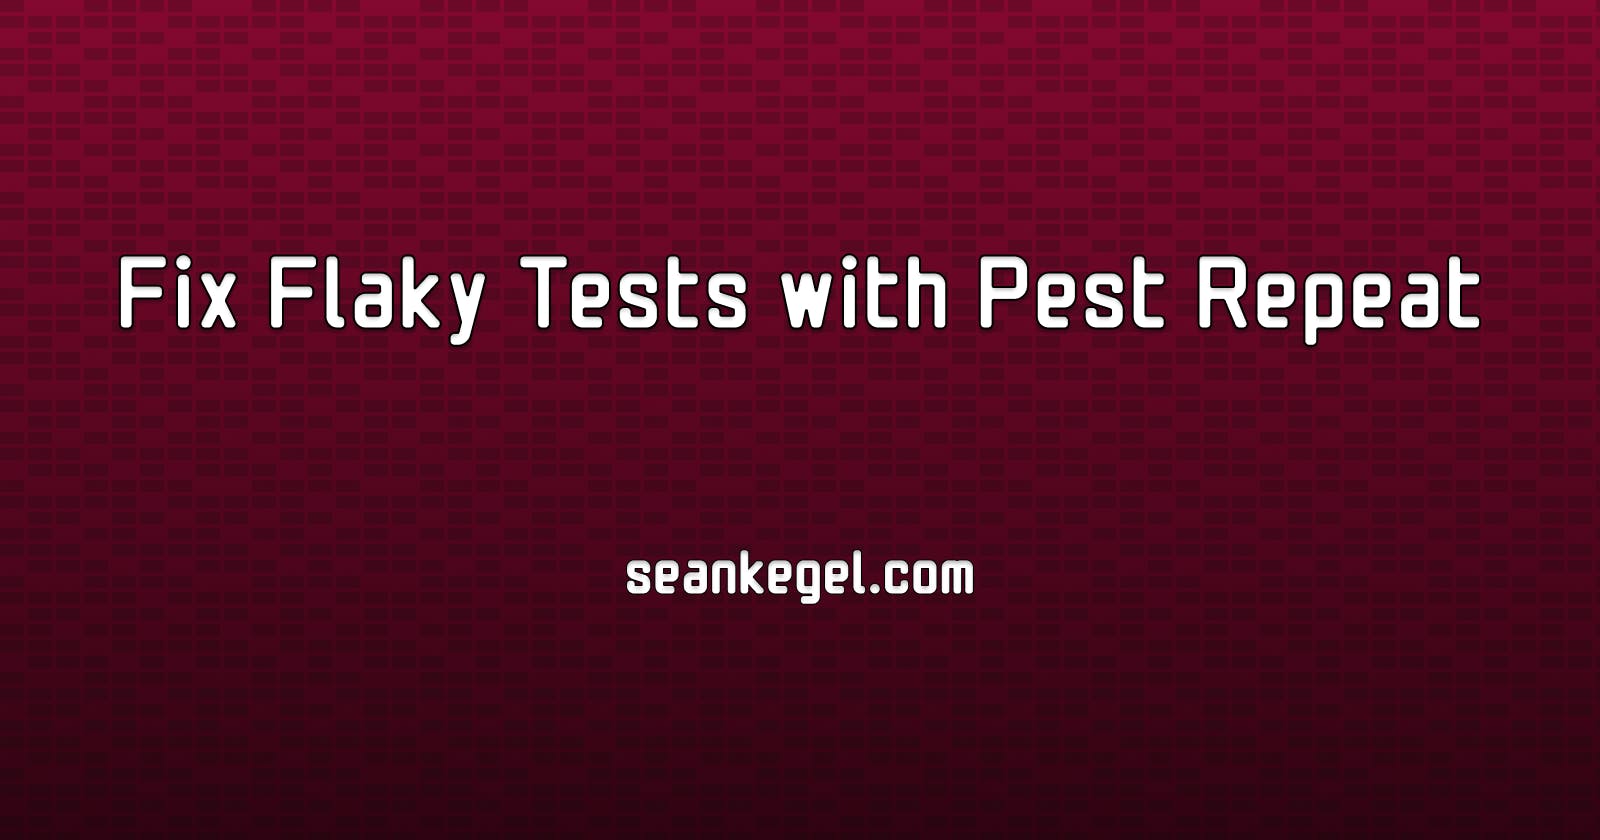 Fix Flaky Tests with Pest Repeat